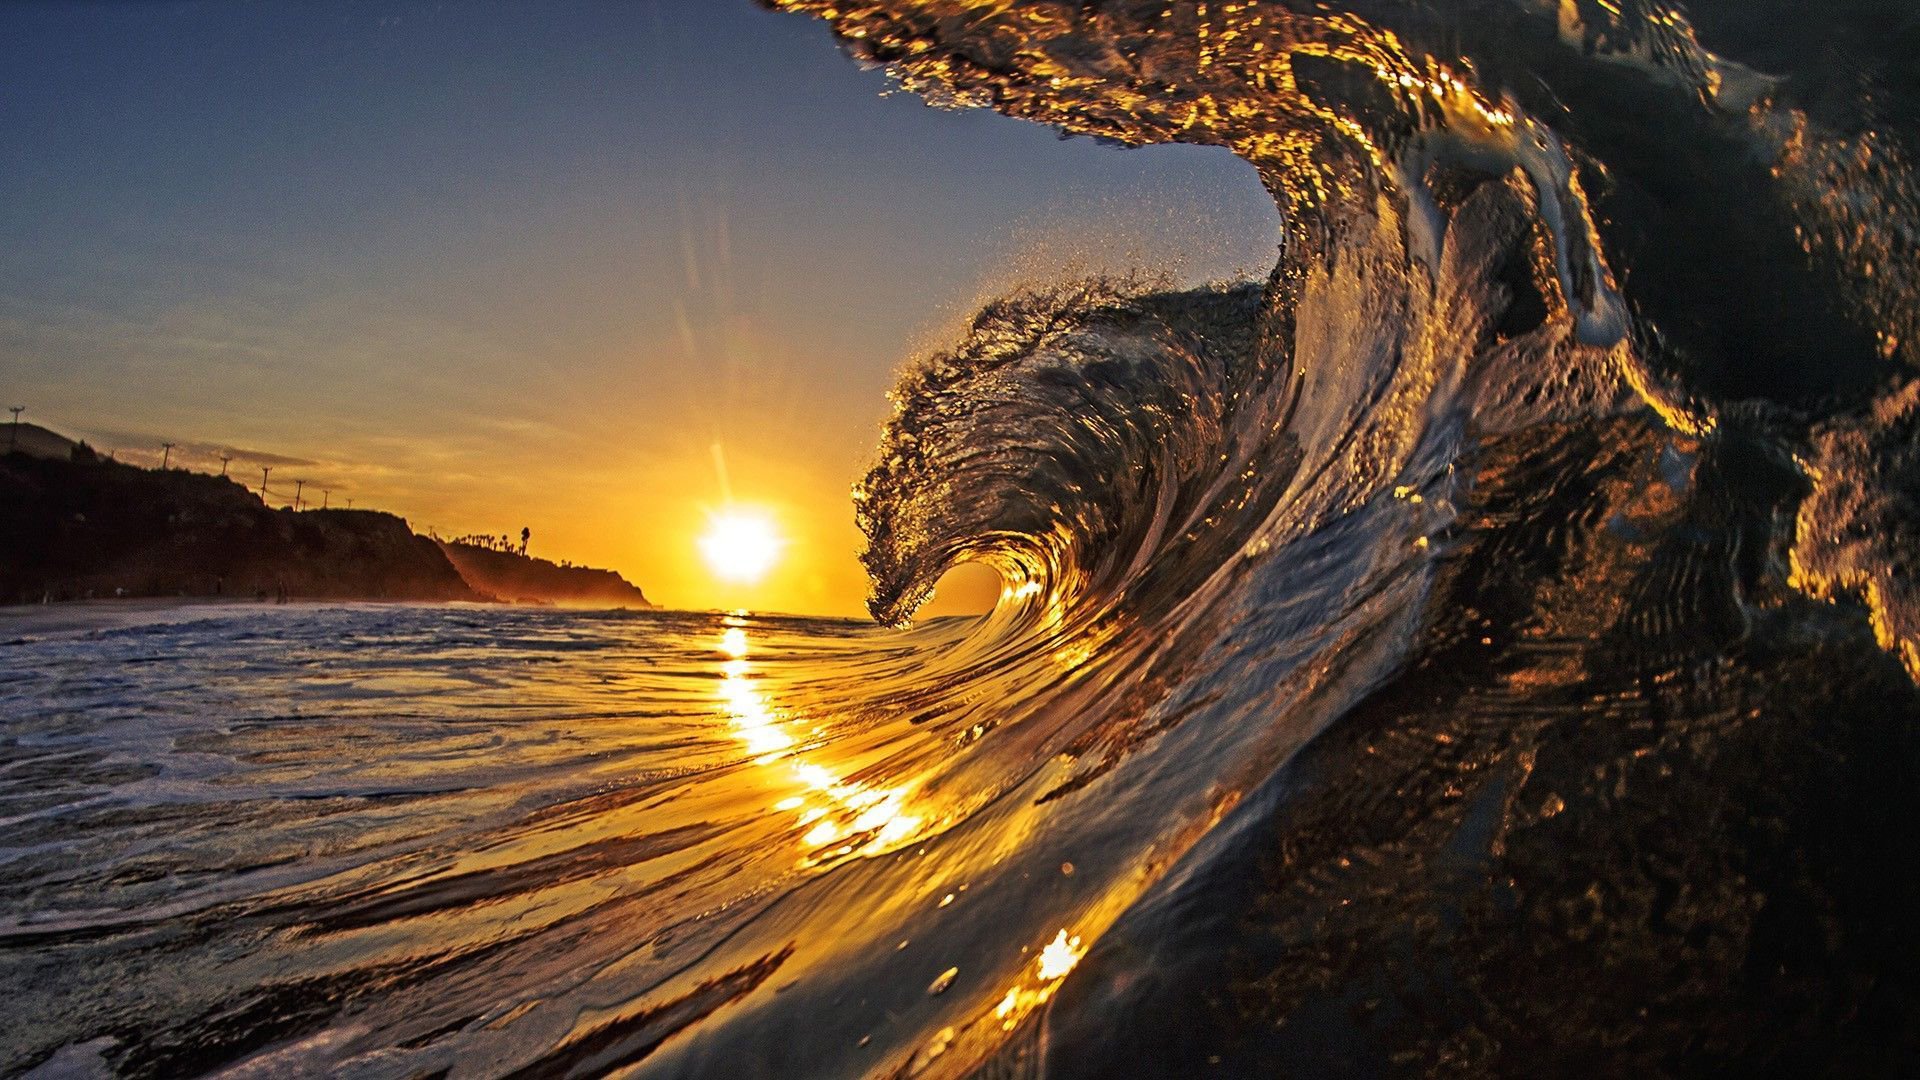 Wave in the sunset 1920x1080 beach wallpaper